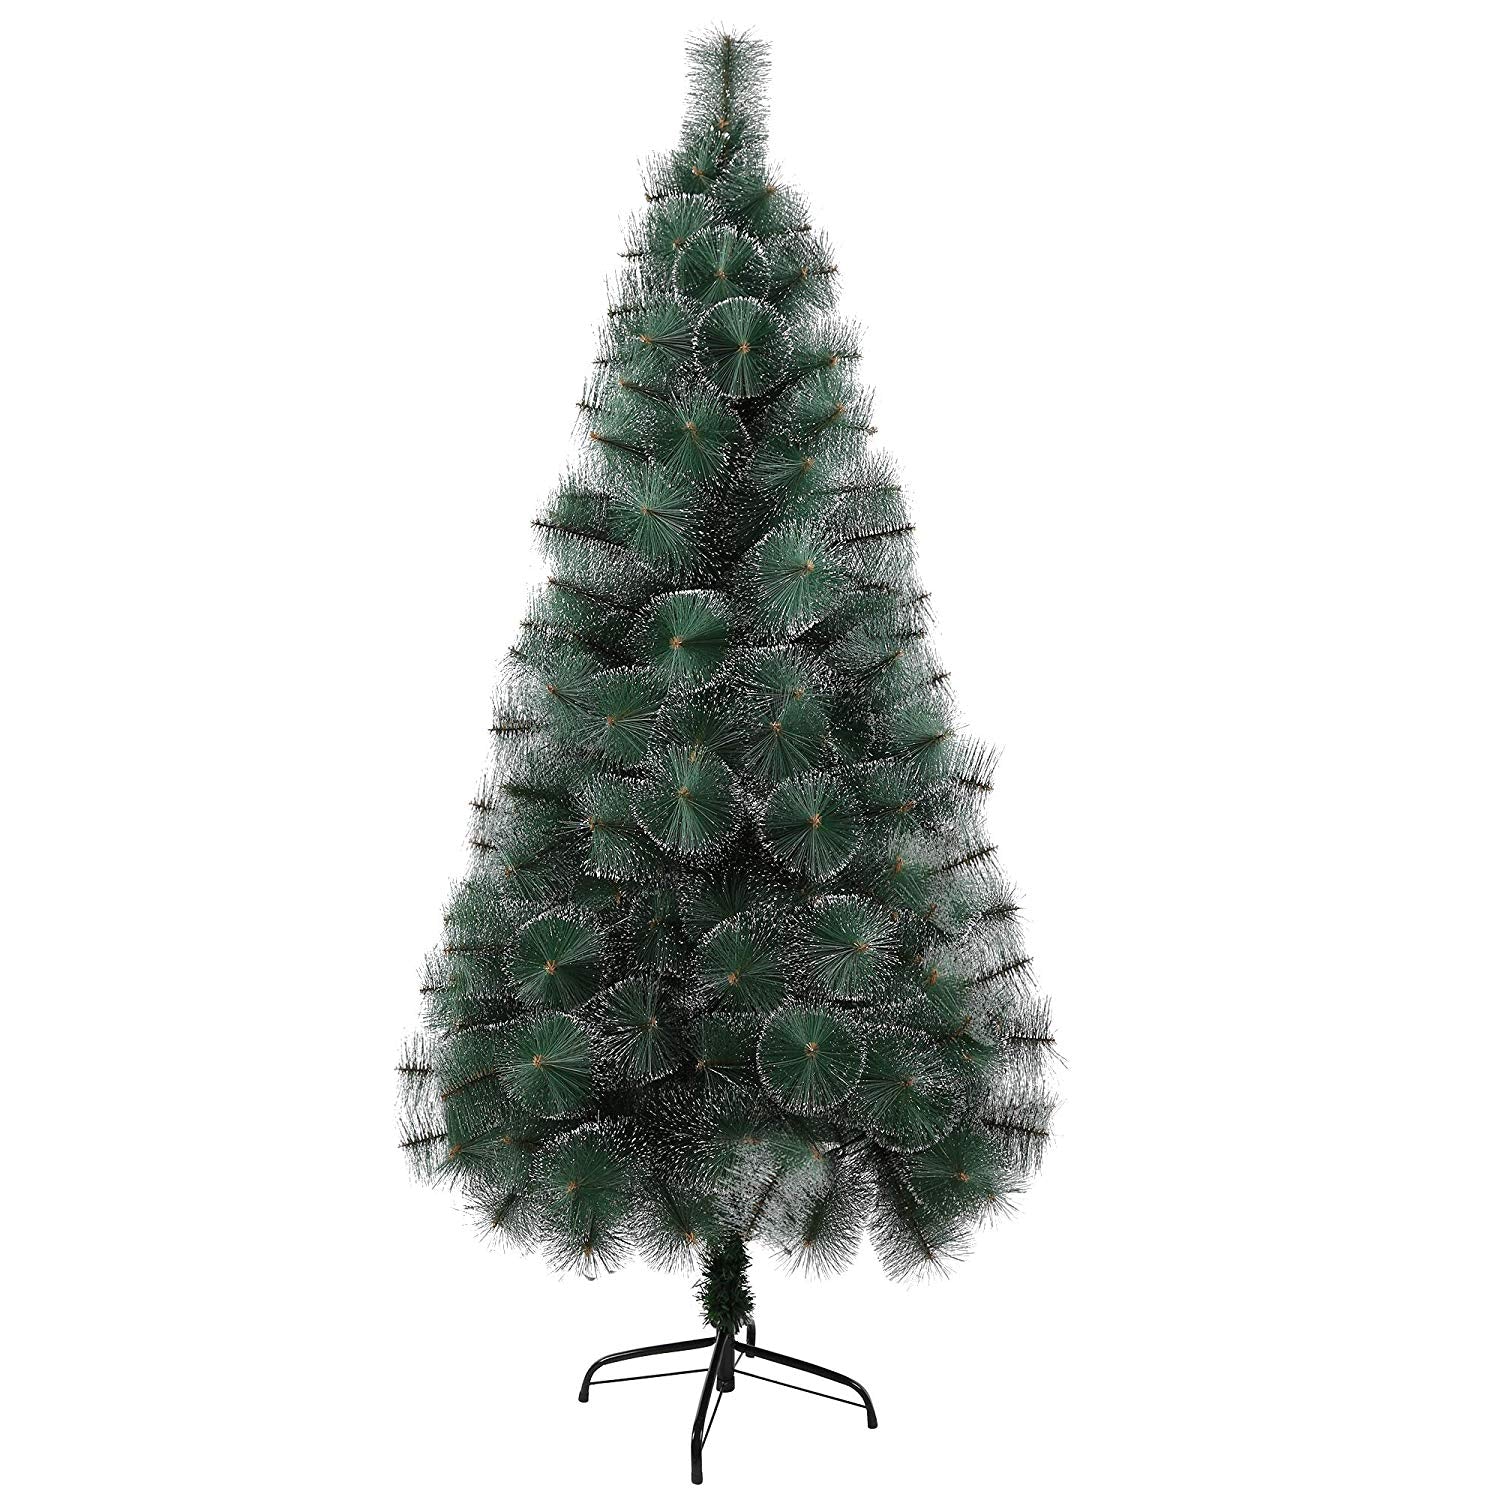 (Out of stock) 6' Classic Pine Needle Tree Encrypted Artificial Christmas Tree Natural Branch with Solid Metal Bracket, Conifer with Snowflake White Point